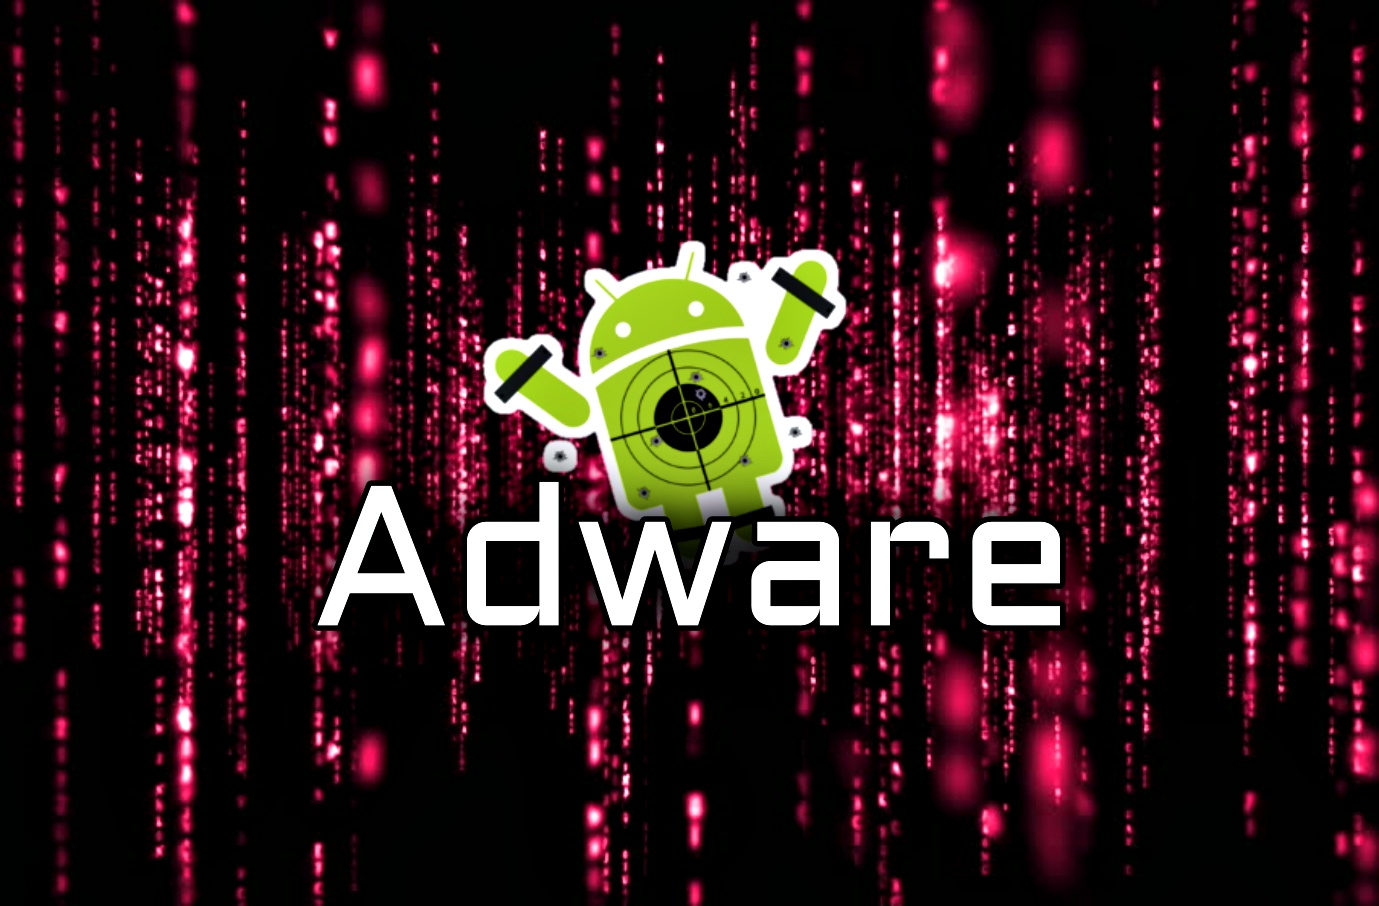 SimBad malware from Play Store infected millions of Android devices